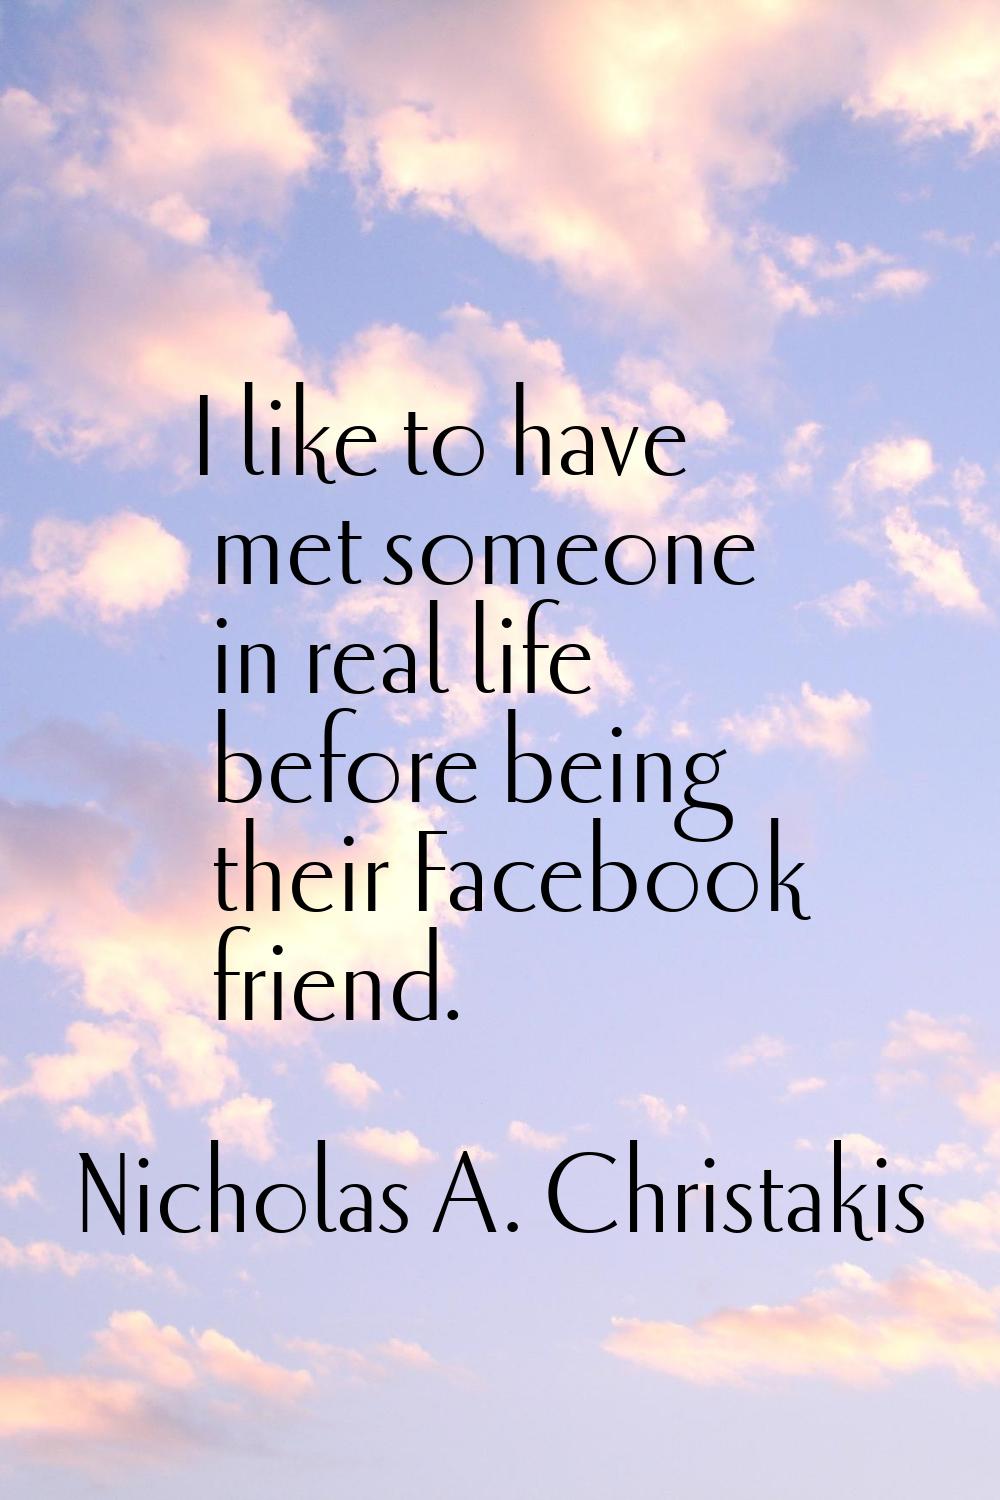 I like to have met someone in real life before being their Facebook friend.